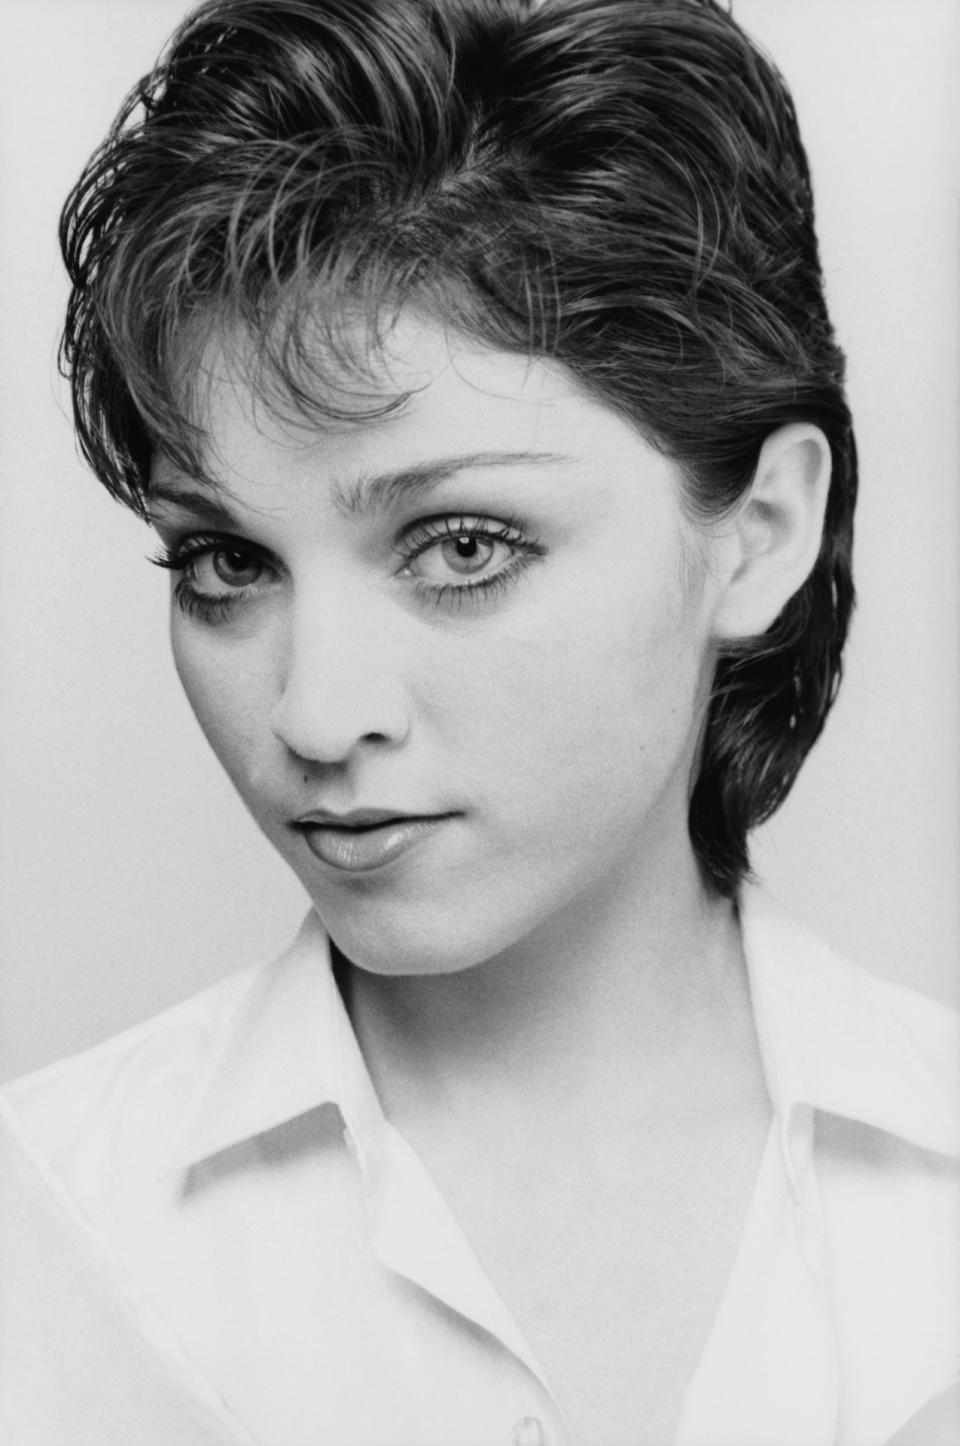 Before she rose to fame as a bottle blonde, Madonna rocked her natural brunette hair and natural makeup.